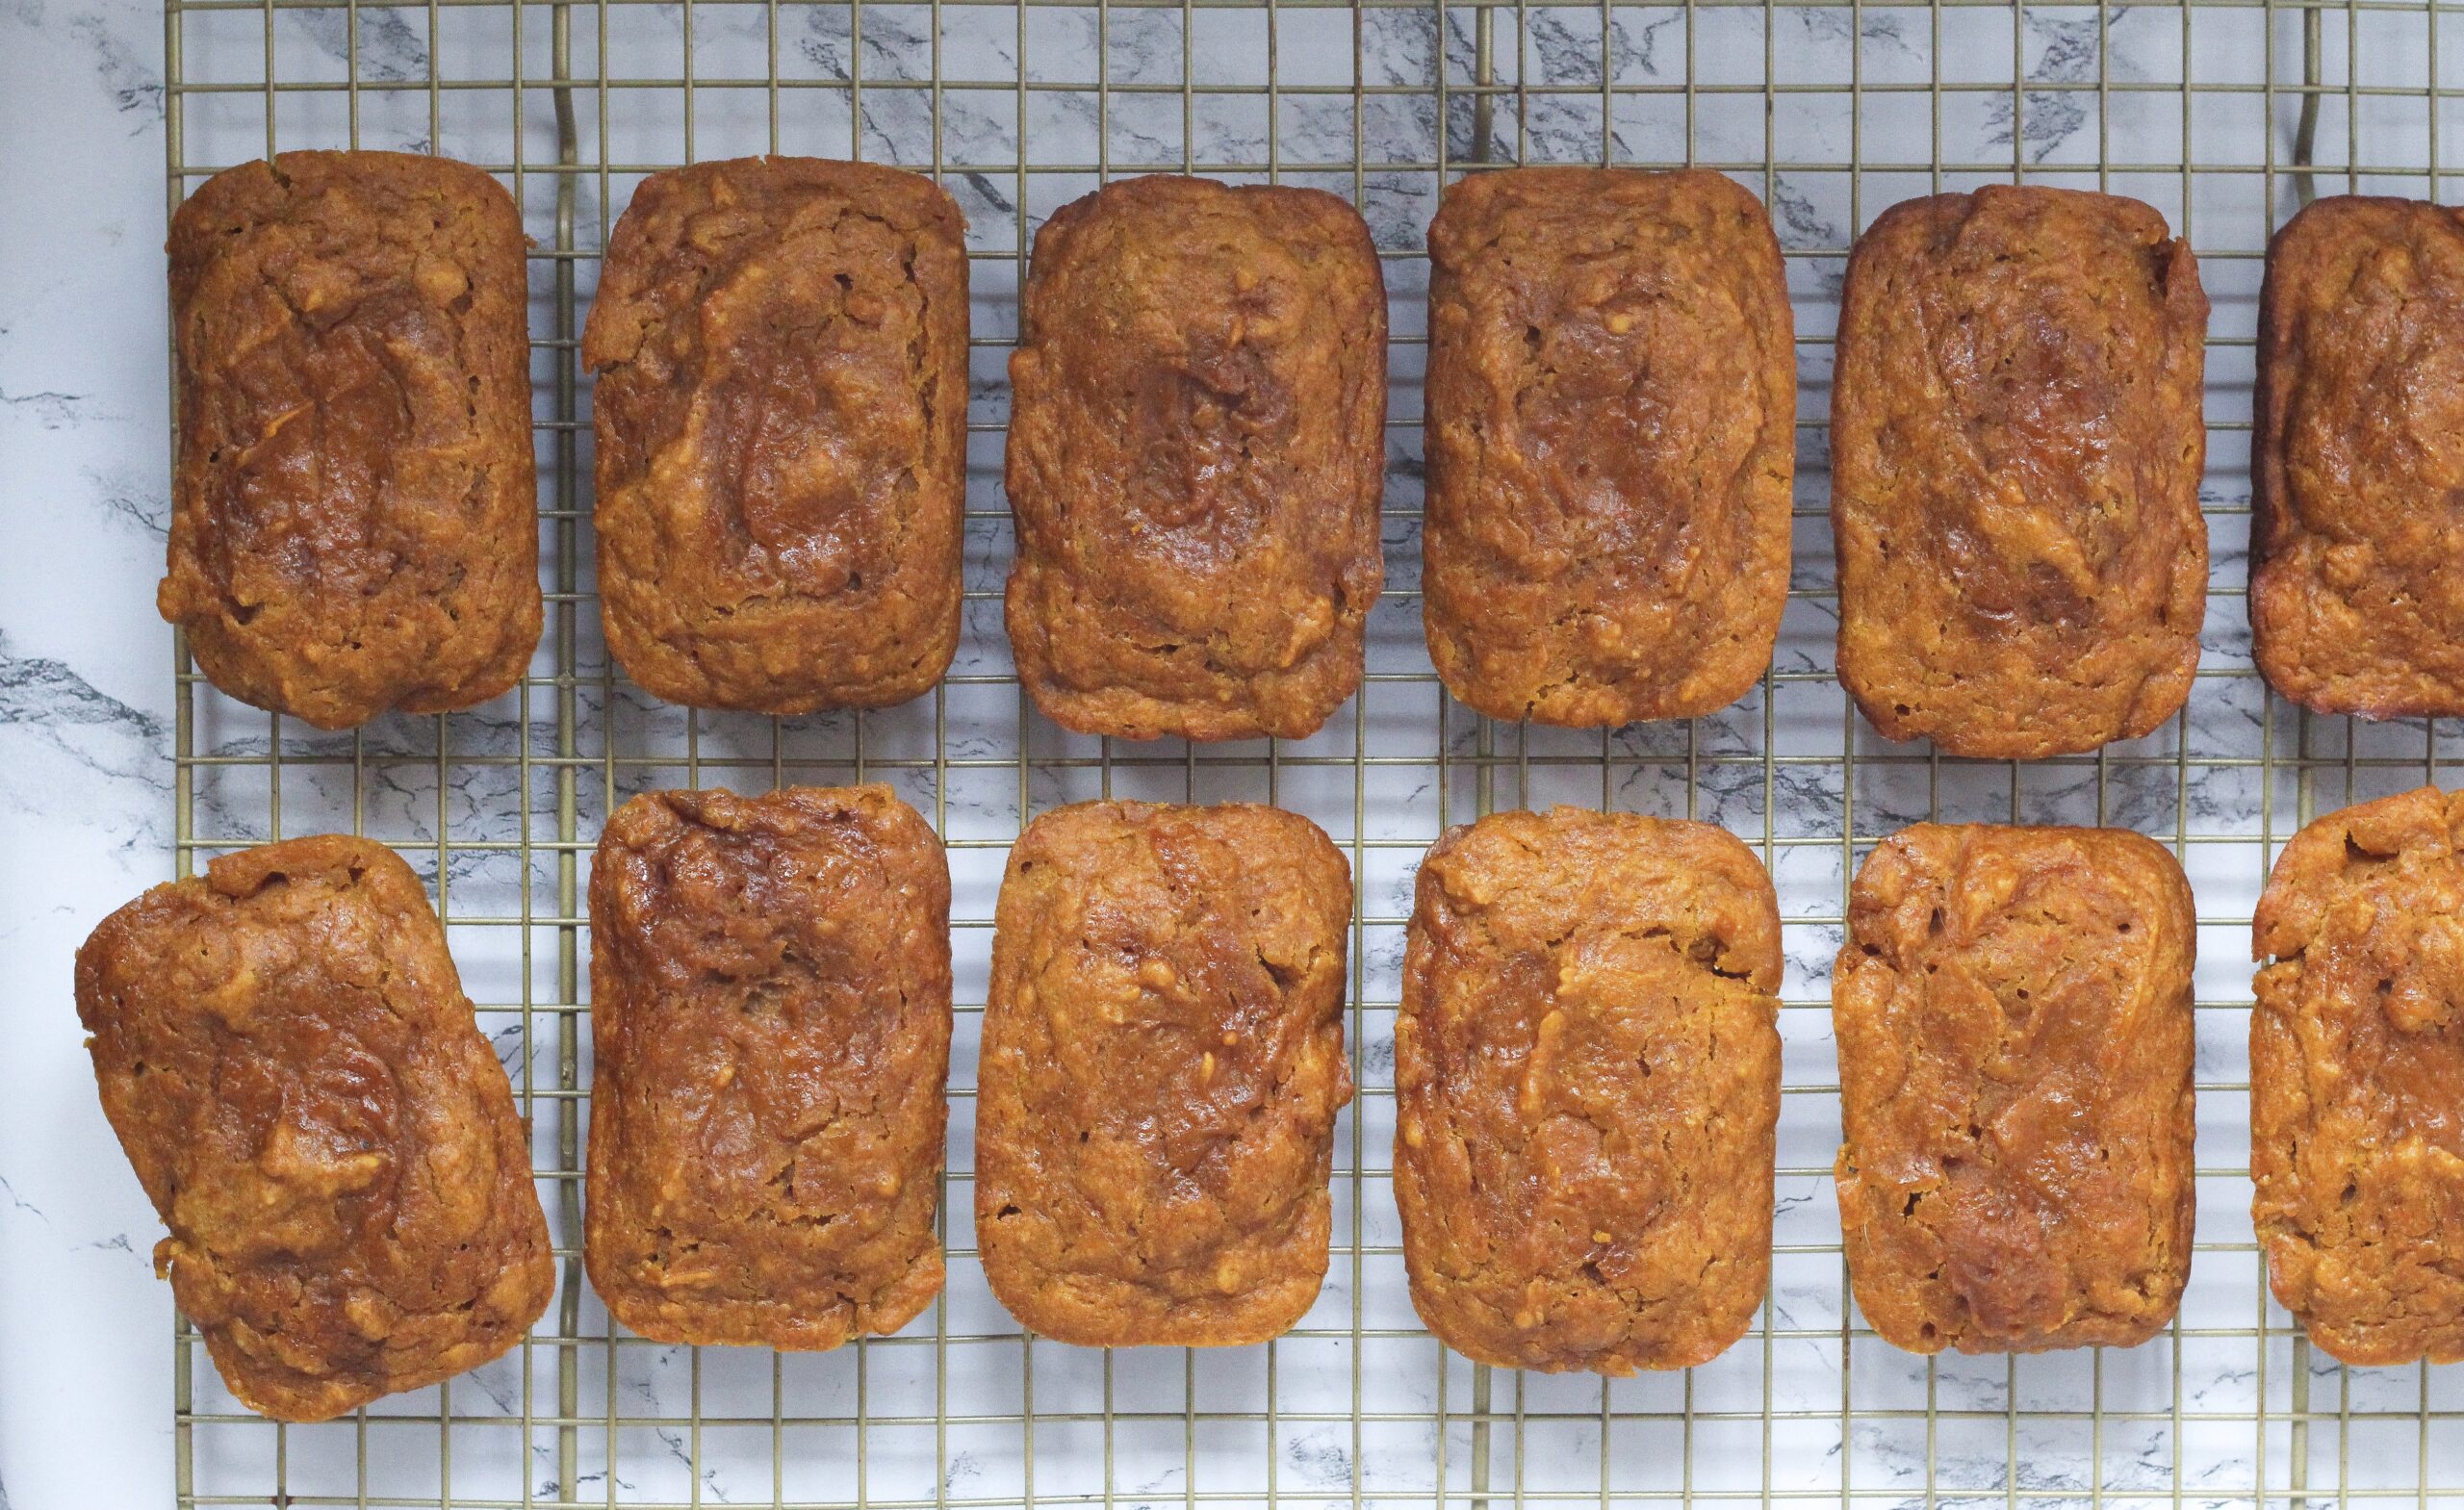 top down view of two horizontal rows of mini pumpkin chai breads, with each mini loaf laying vertically. The loaves are on a wire rack, and the bottom left roll is slightly tilted out of line